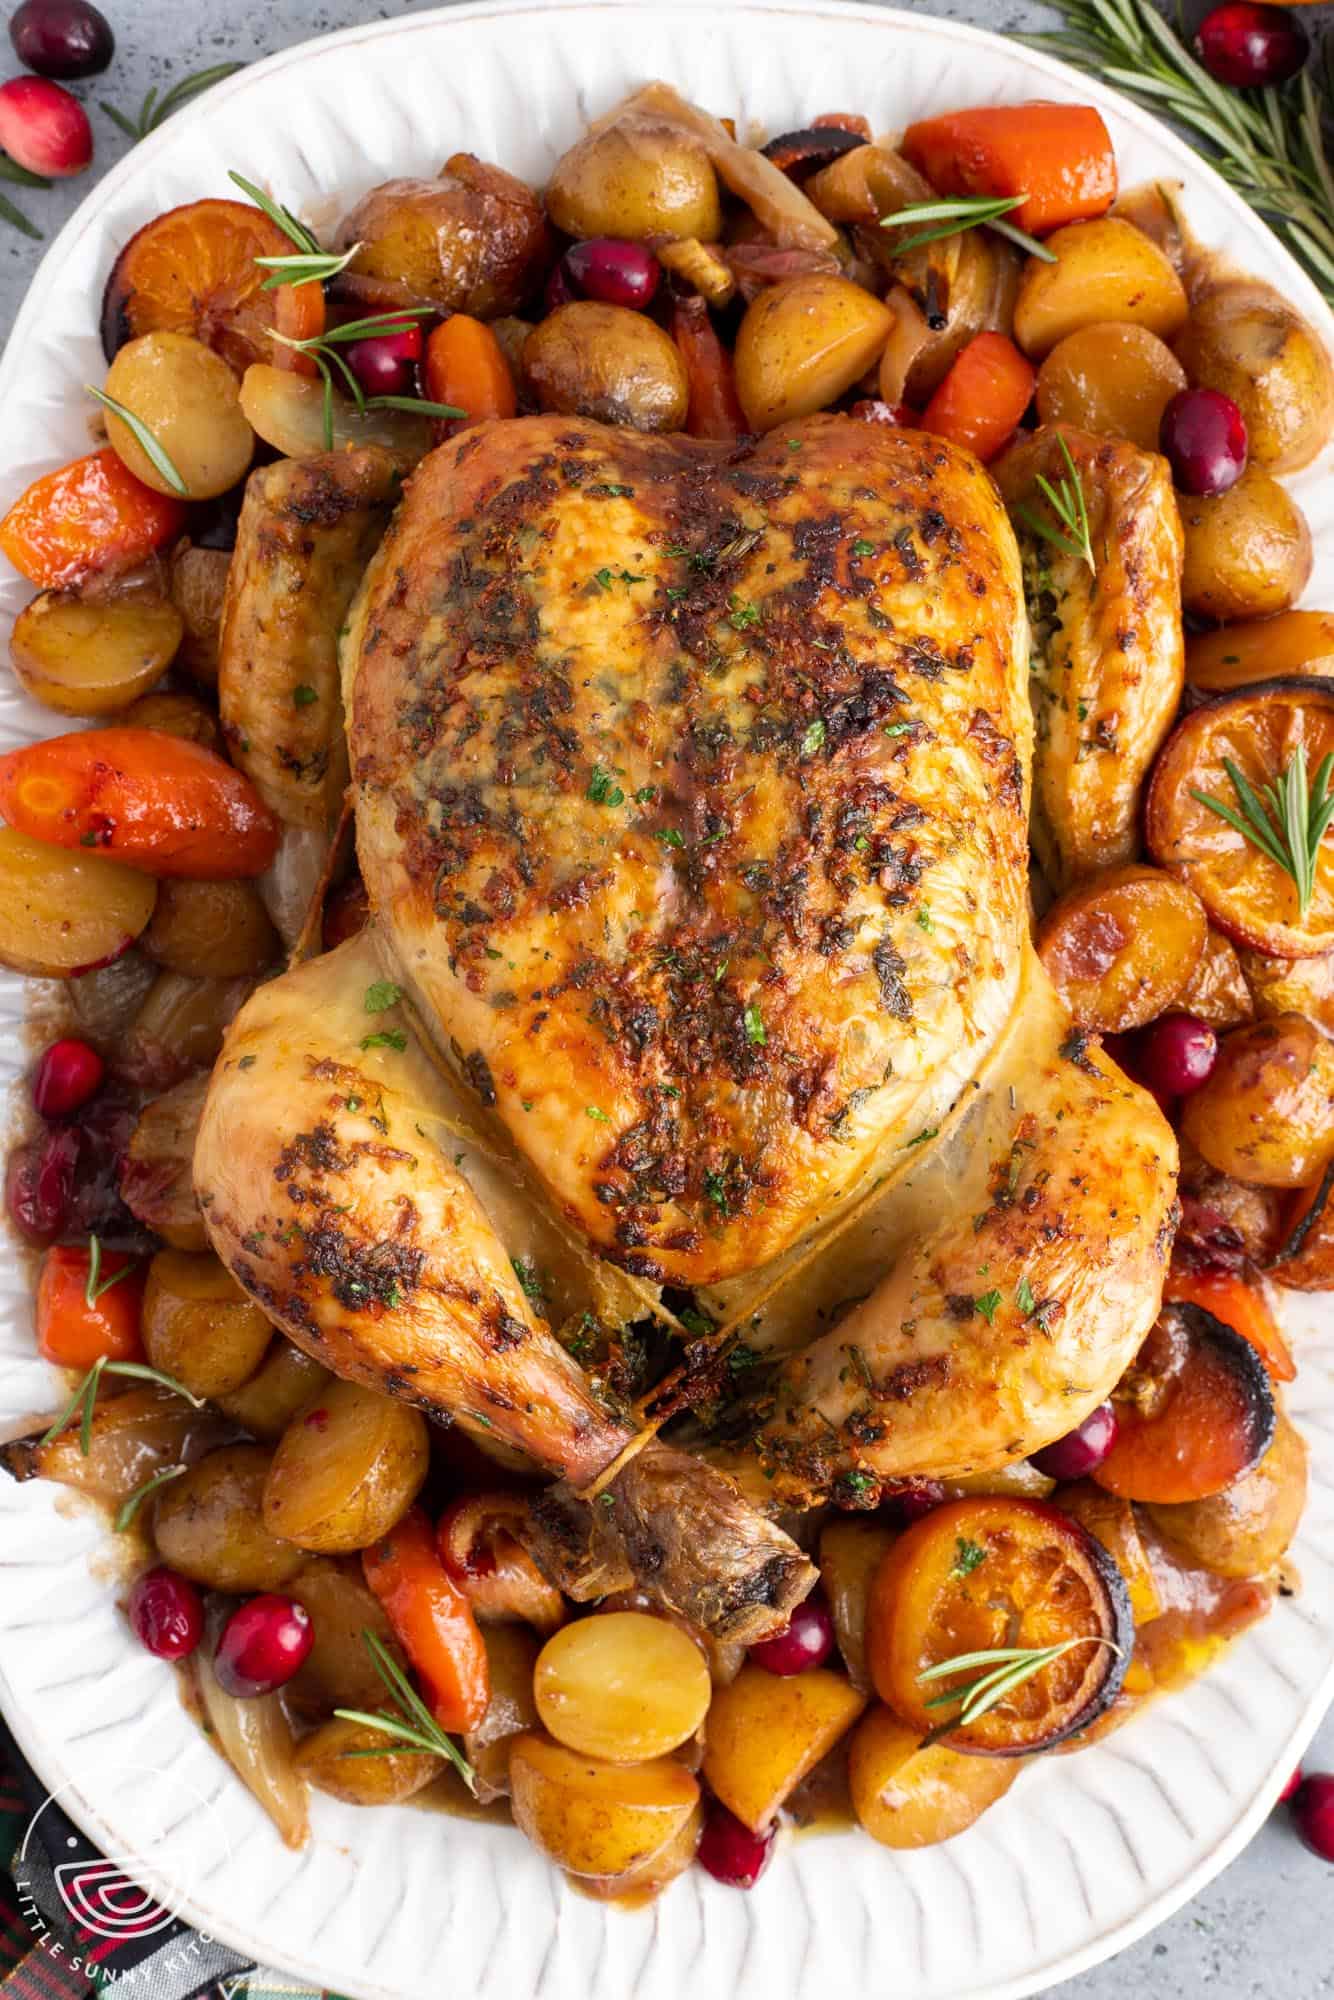 a white platter holding braised vegetables including potatoes, carrots, onions, orange slices, and cranberries. On top of the vegetables is a whole roasted chicken, garnished with rosemary.